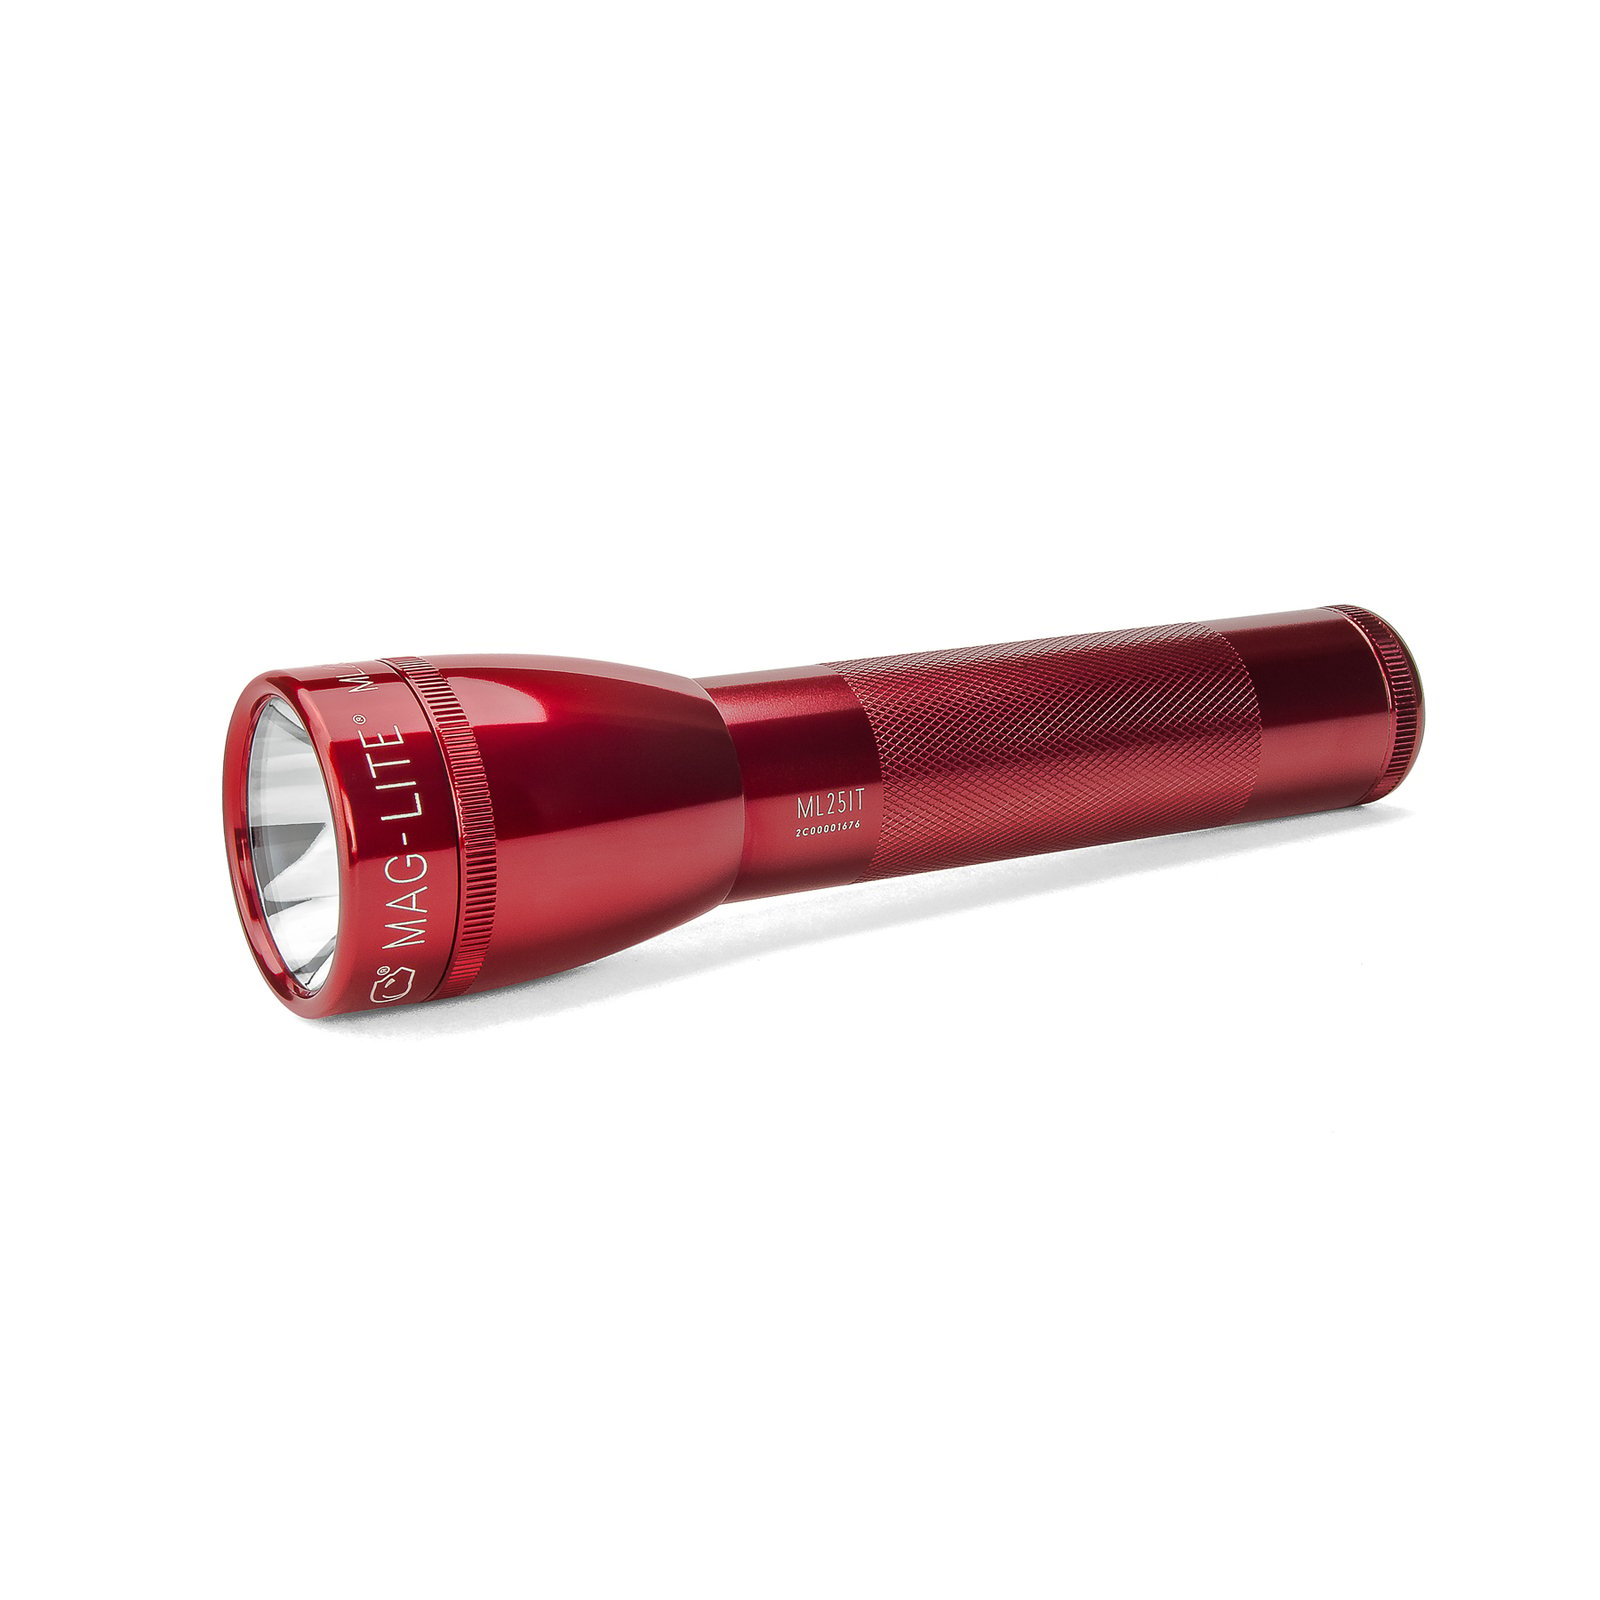 Maglite Xenon torch ML25IT, 2-Cell C, with Boxer, red